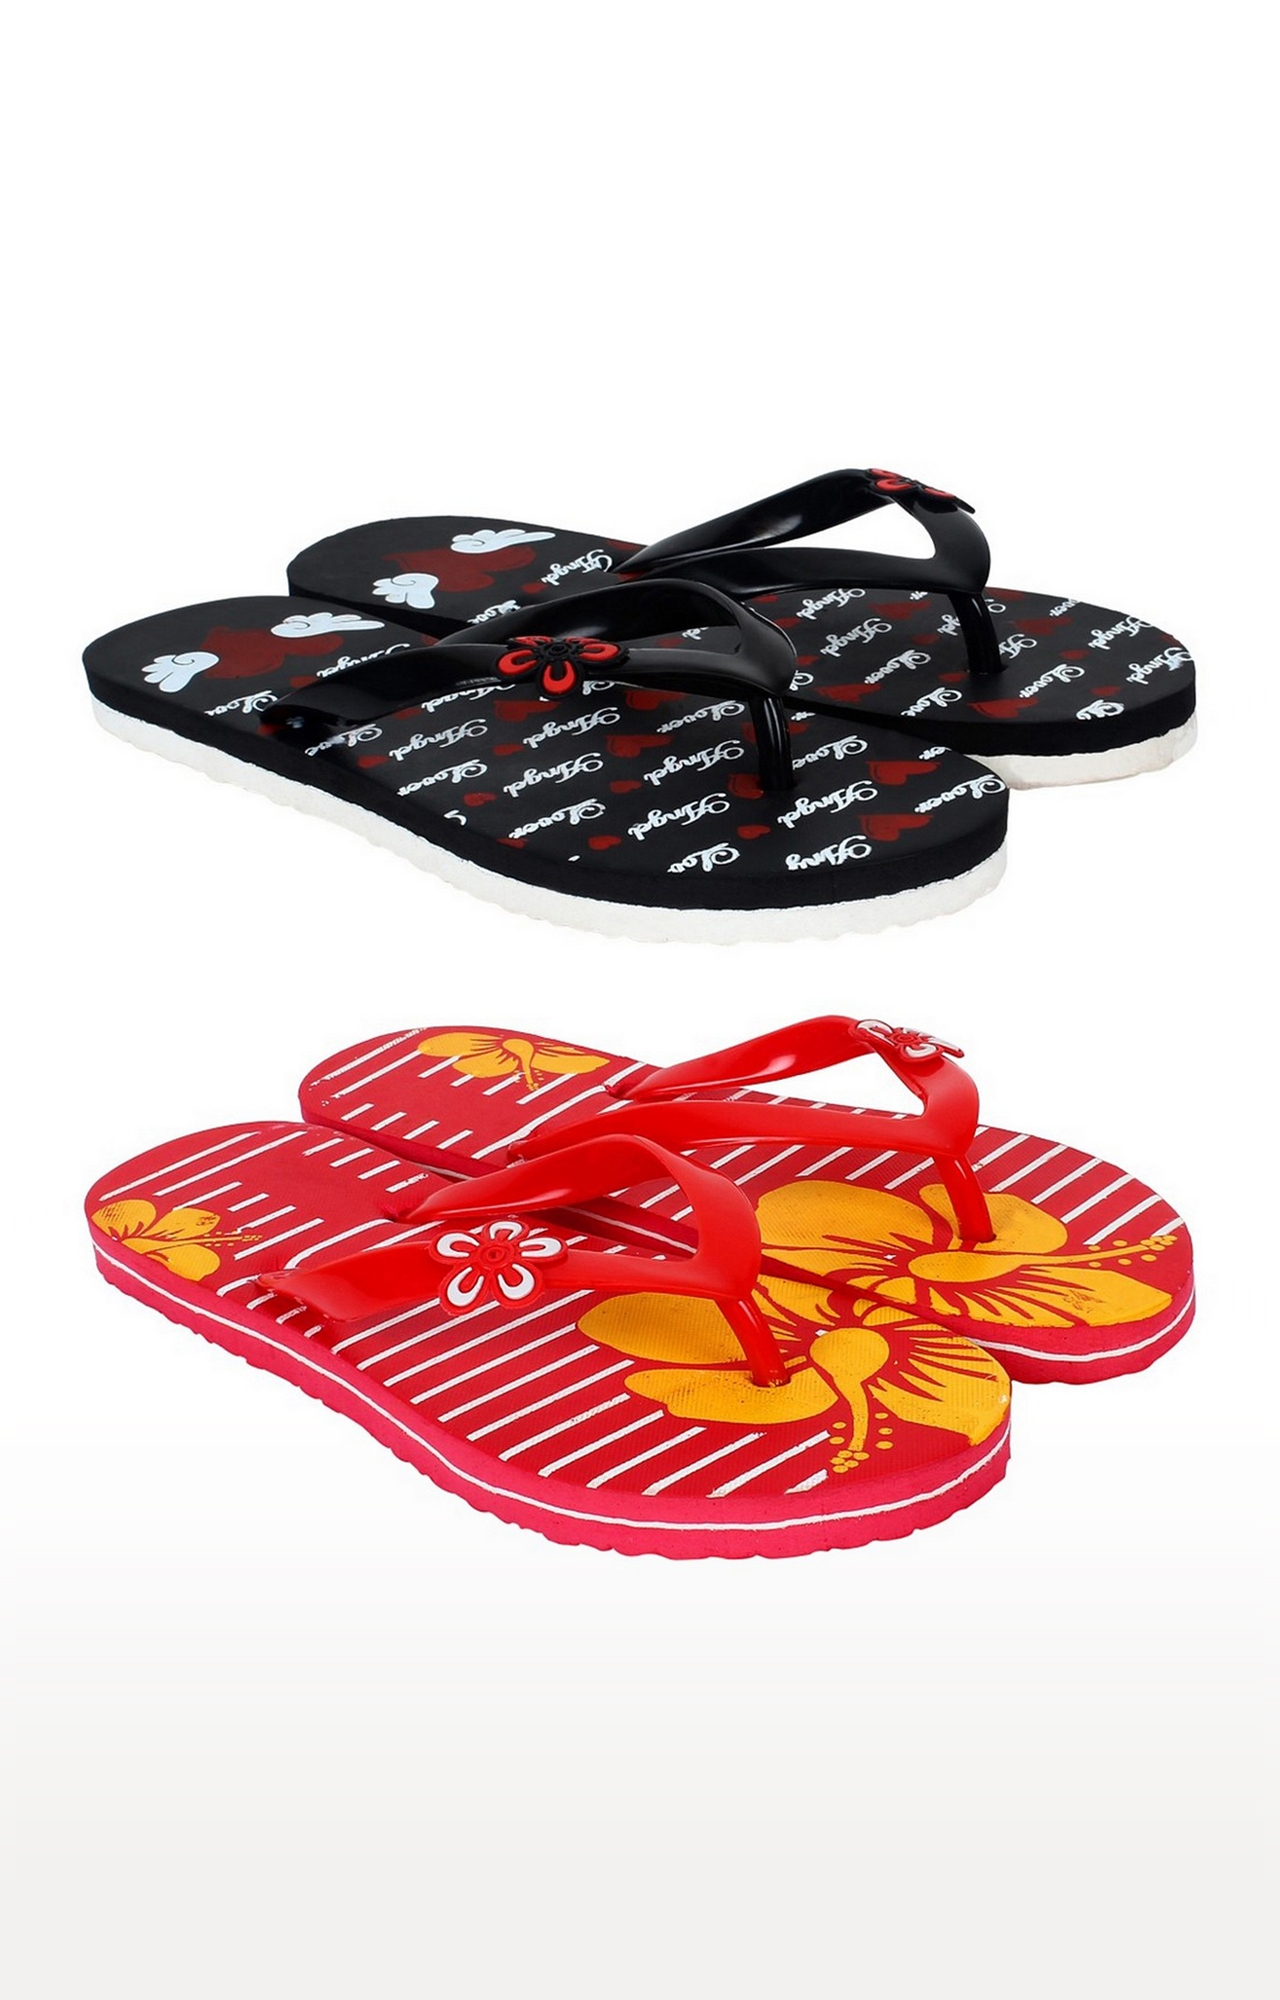 SIDEWOK | Sidewok Women's Black and Red Slippers - Pack of 2